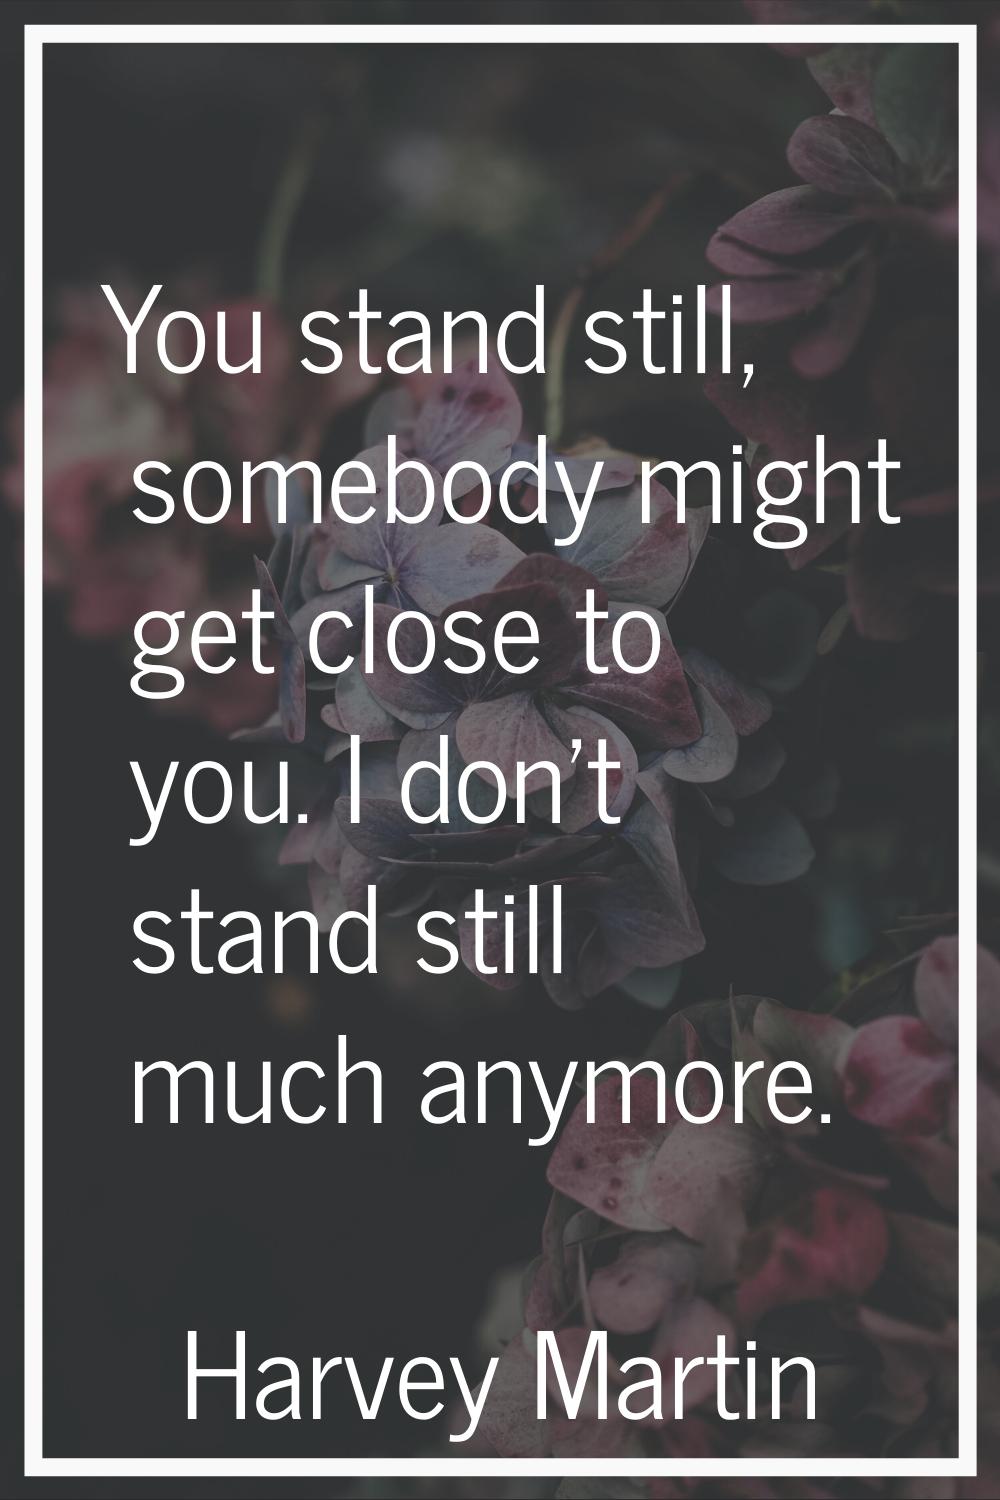 You stand still, somebody might get close to you. I don't stand still much anymore.